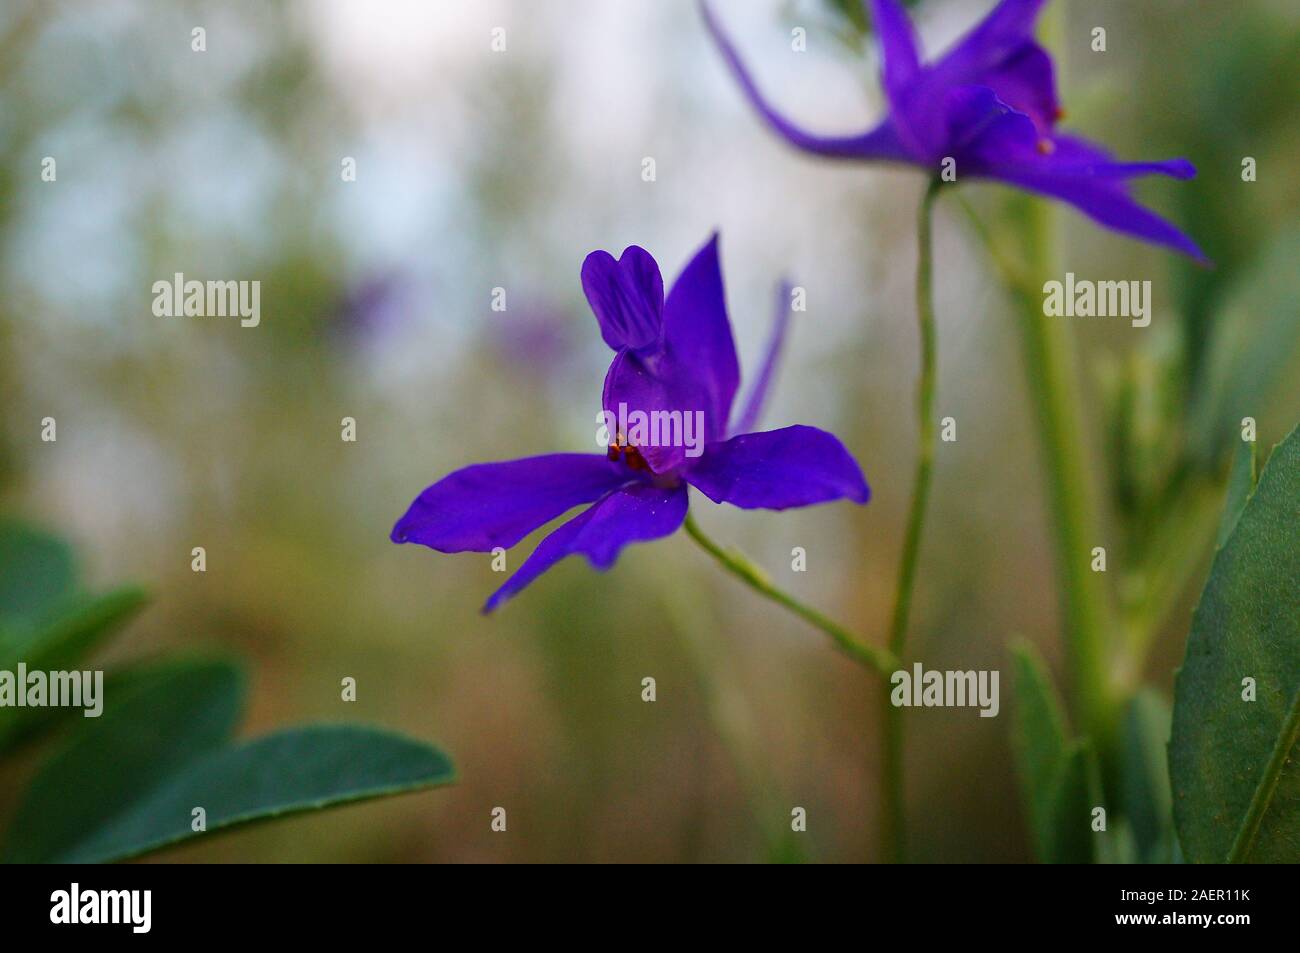 Photos of beautiful wild flowers. The flowering of spring. Stock Photo